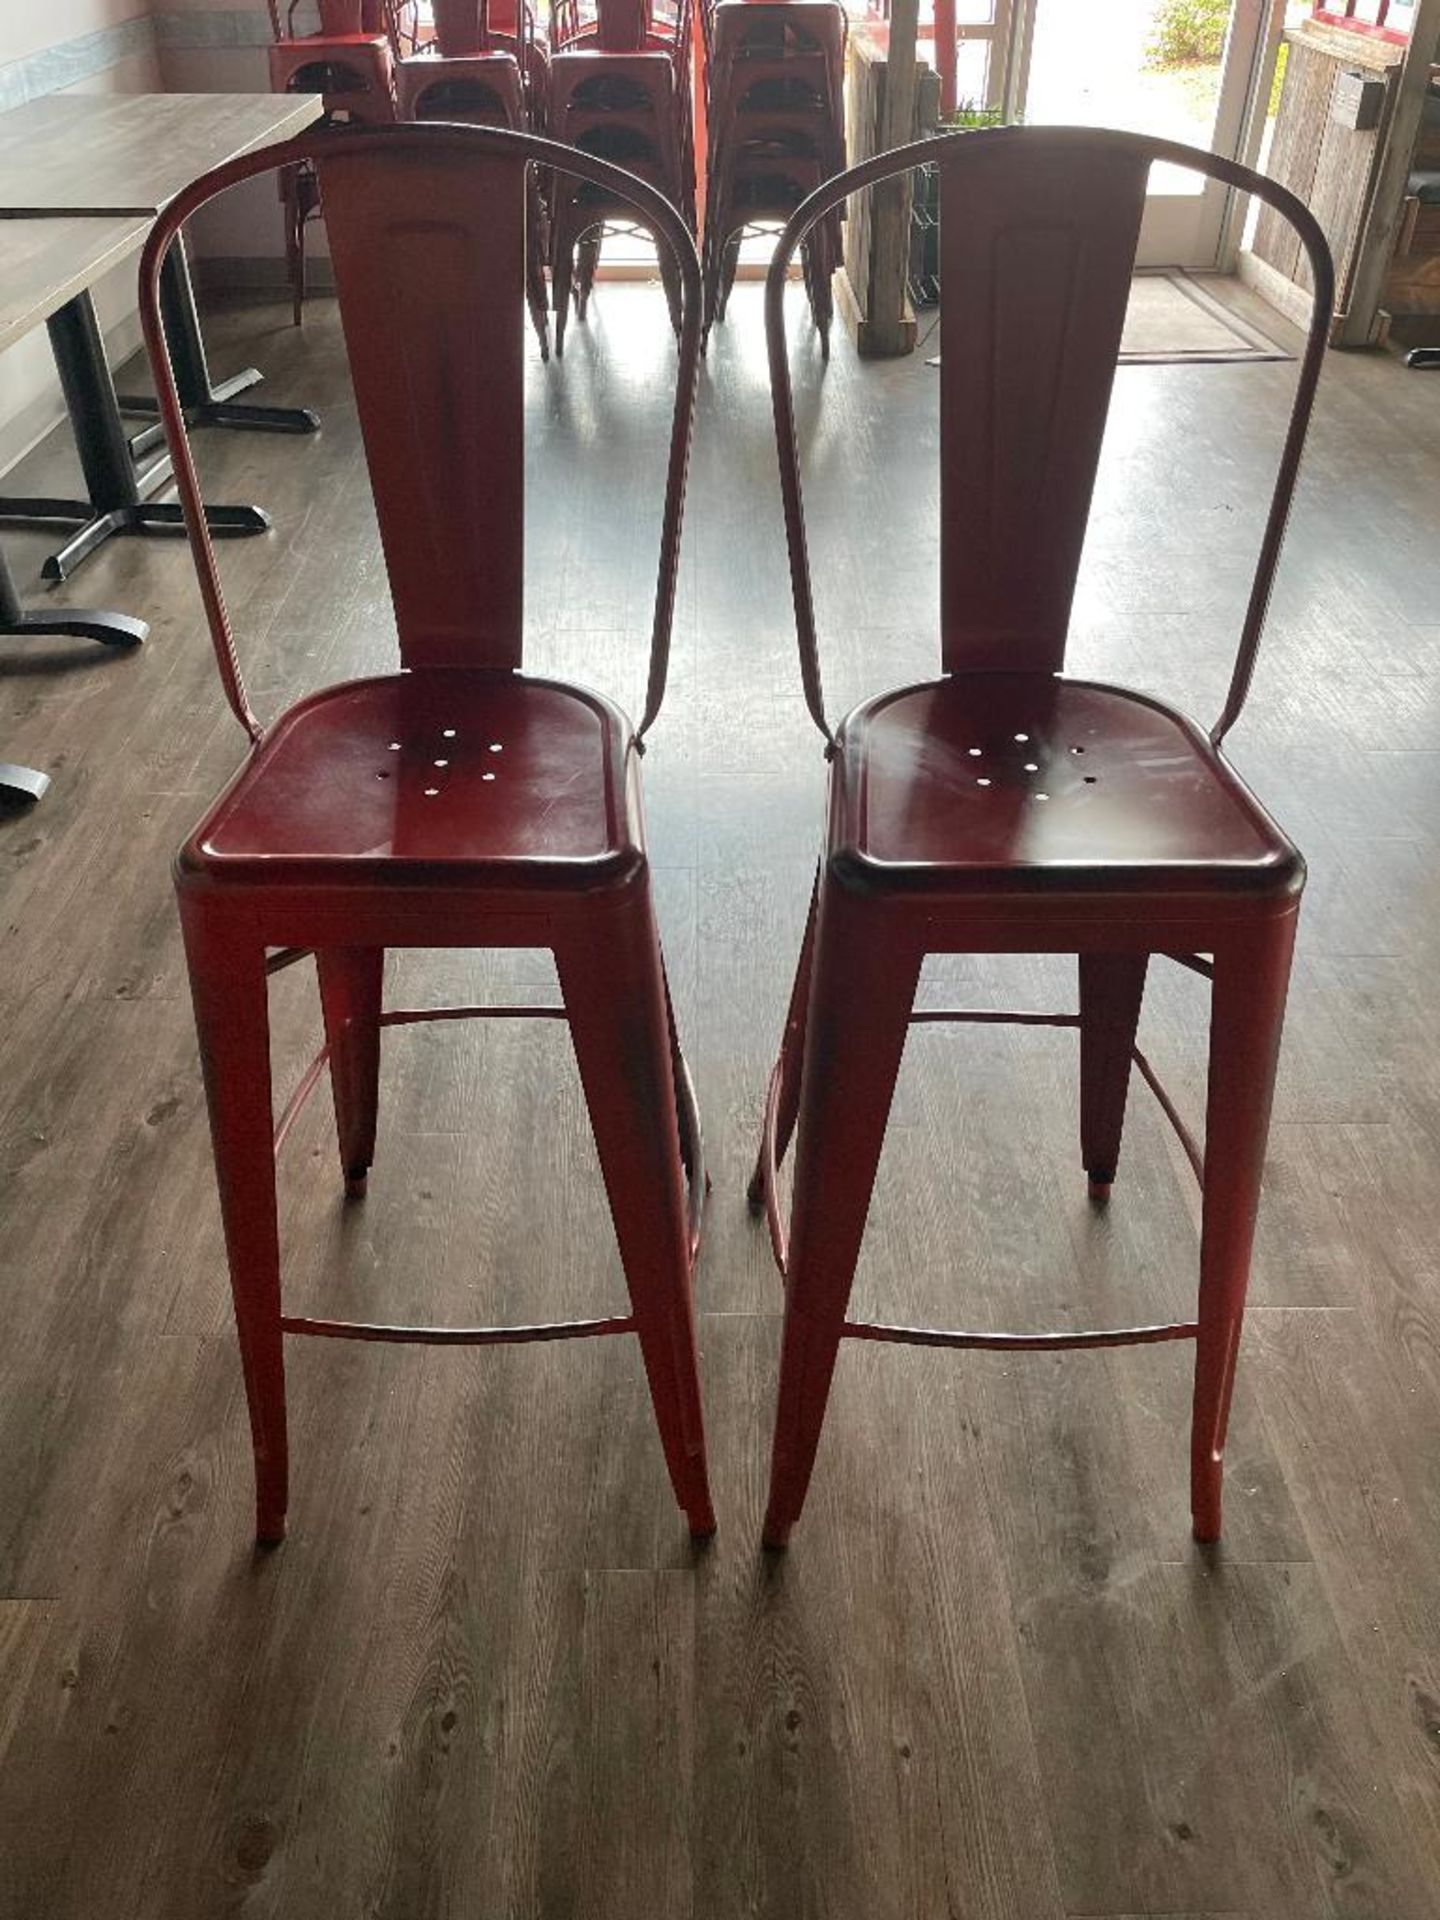 DESCRIPTION: (3) 30" METAL BAR STOOLS ADDITIONAL INFORMATION FADED TABASCO LOCATION: SEATING THIS LO - Image 3 of 3